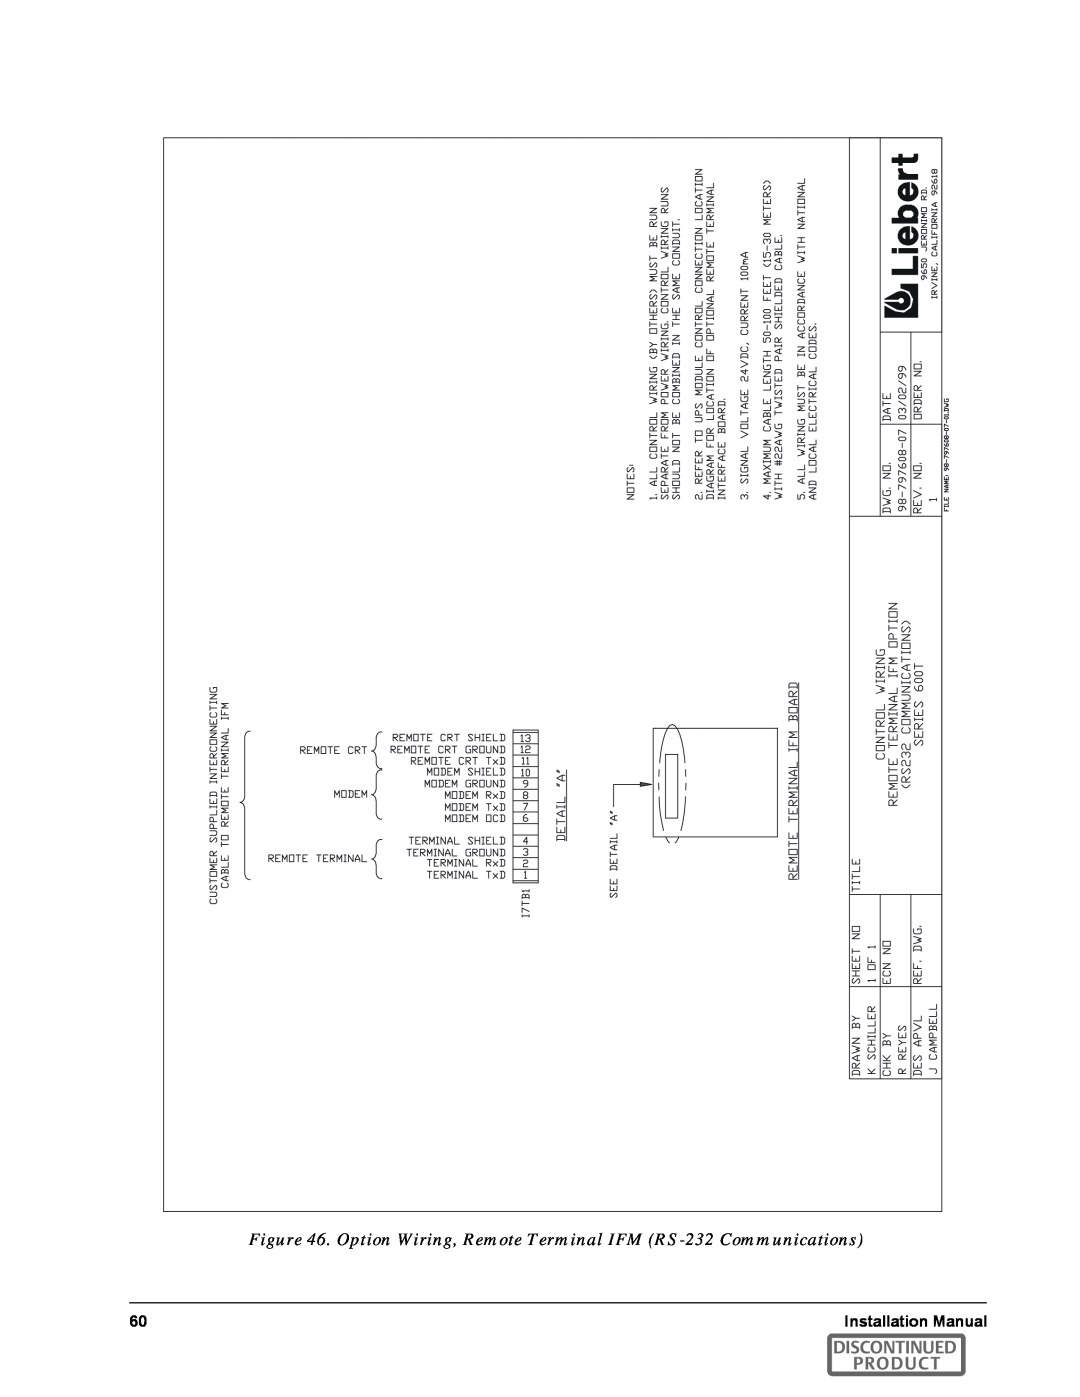 Emerson SERIES 600T manual Option Wiring, Remote Terminal IFM RS-232 Communications, Discontinued Product 